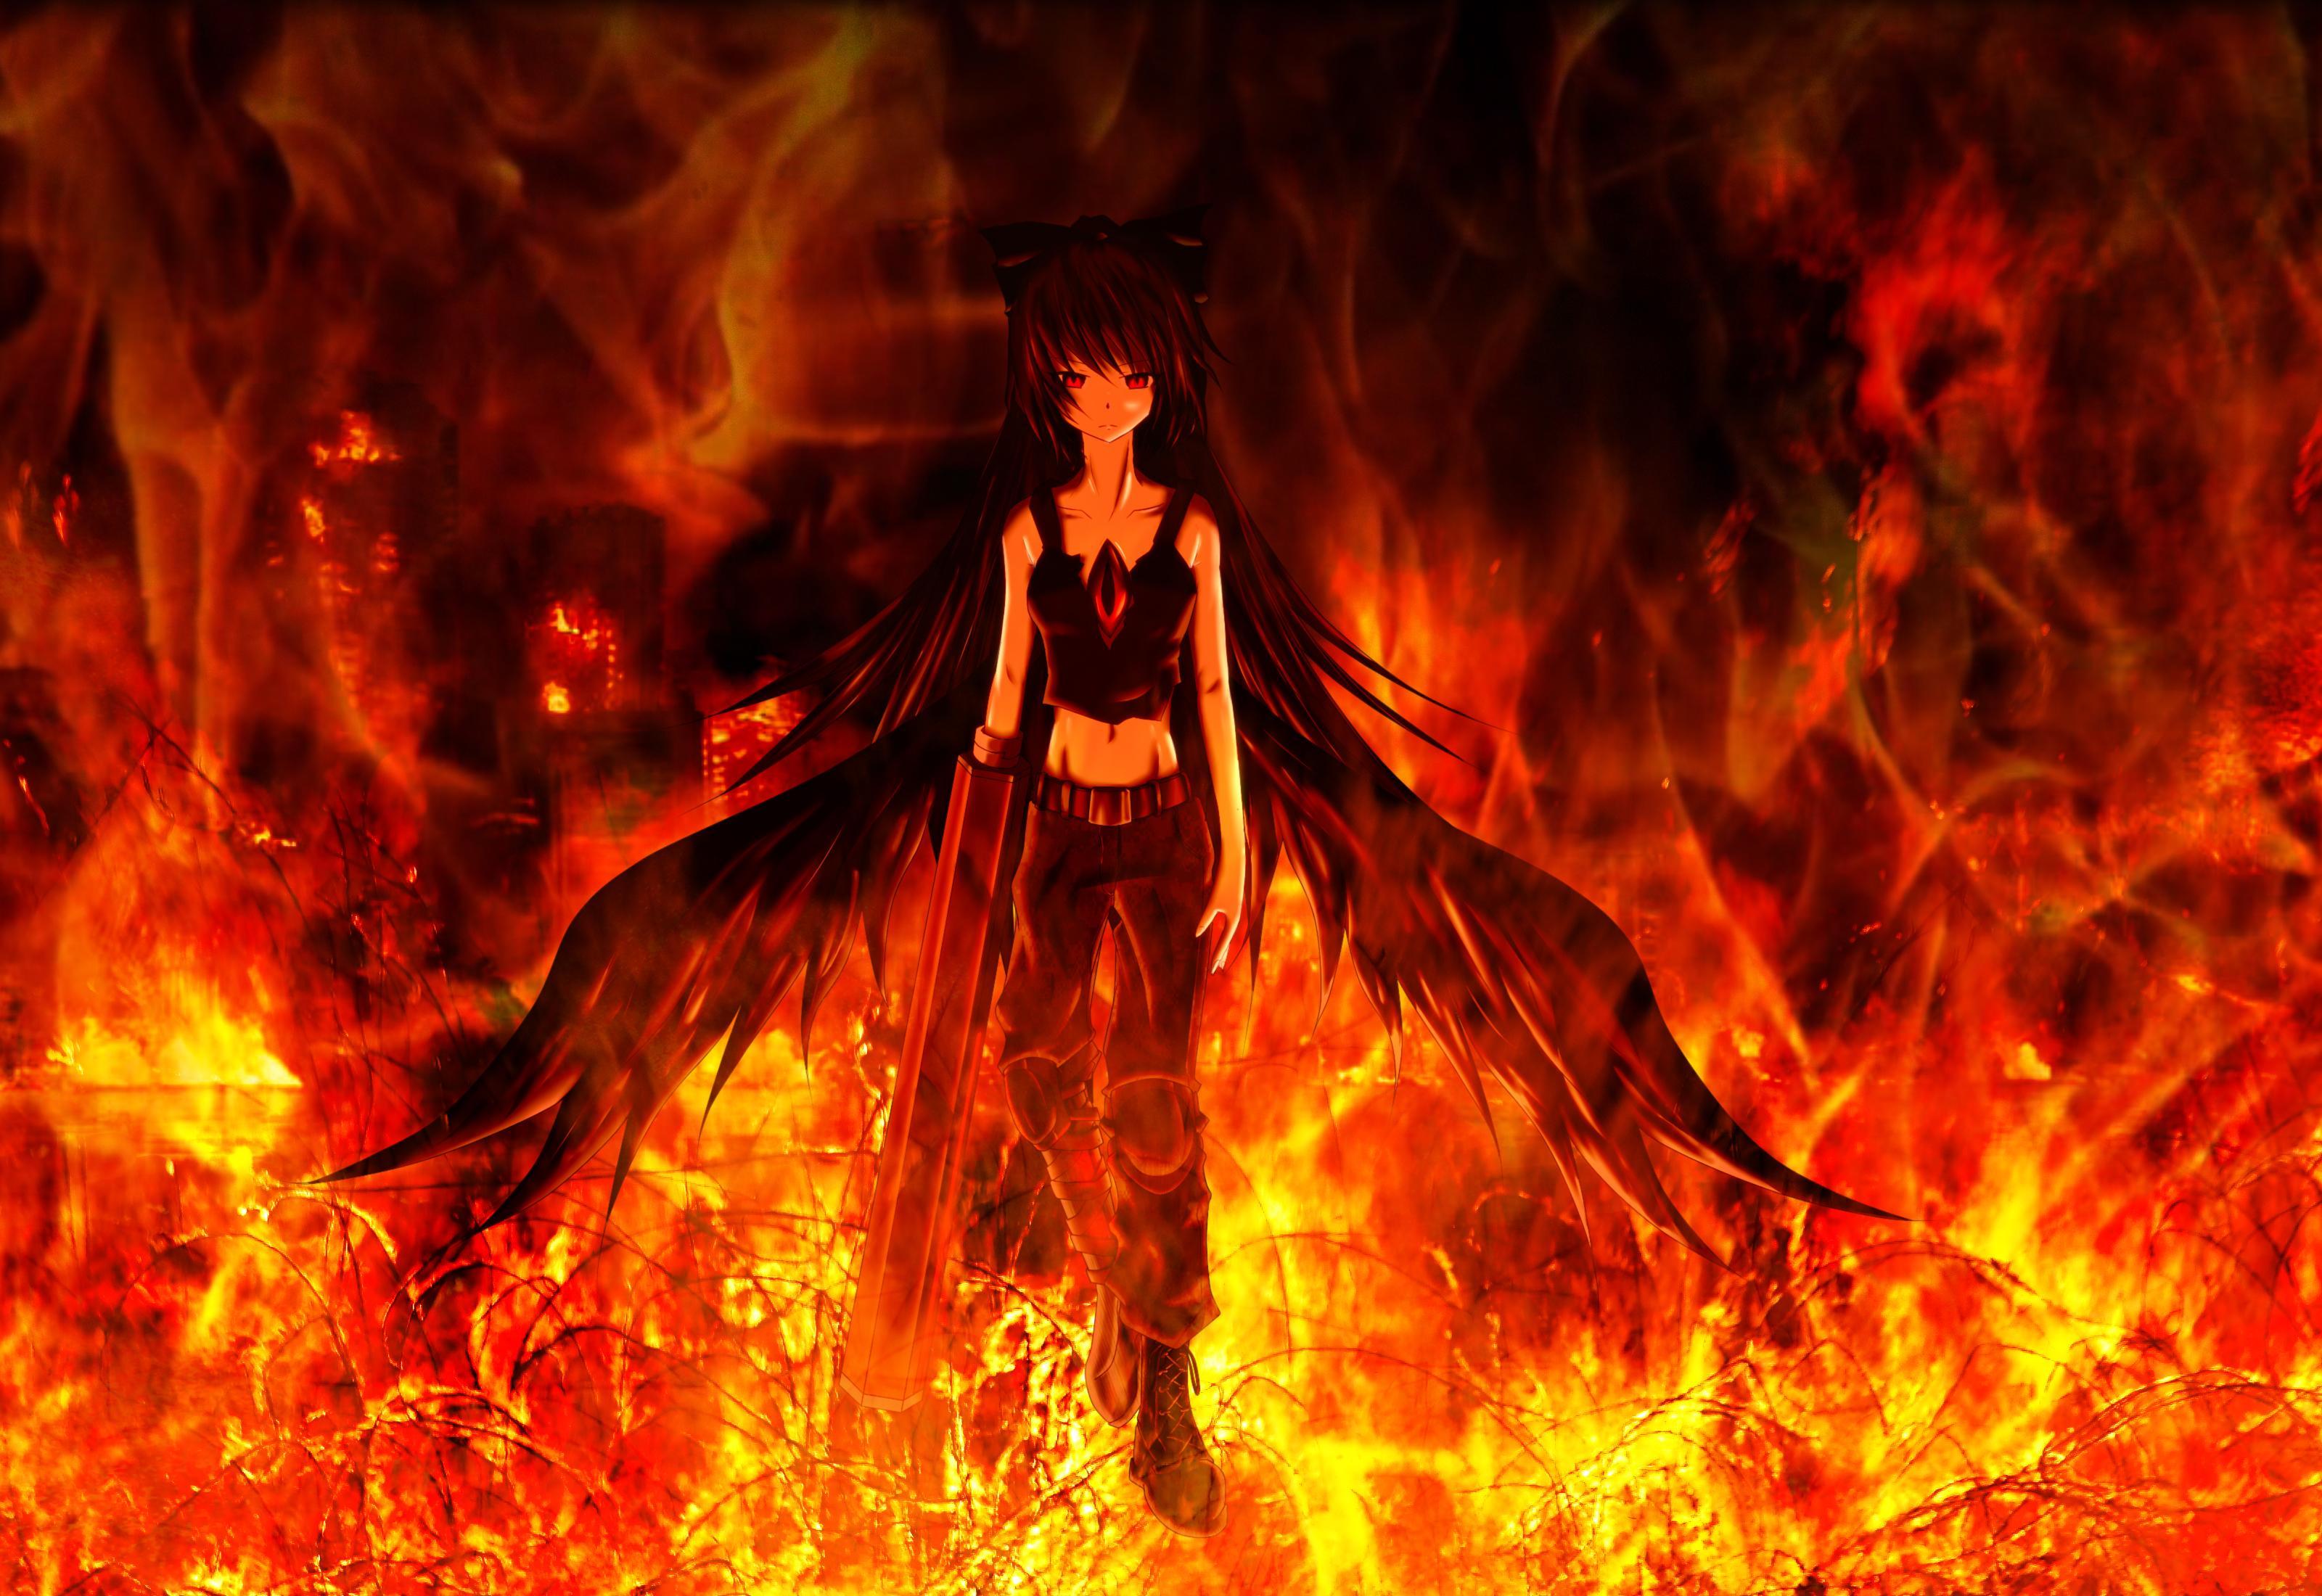 Anime Flame Wallpaper Free Anime Flame Background